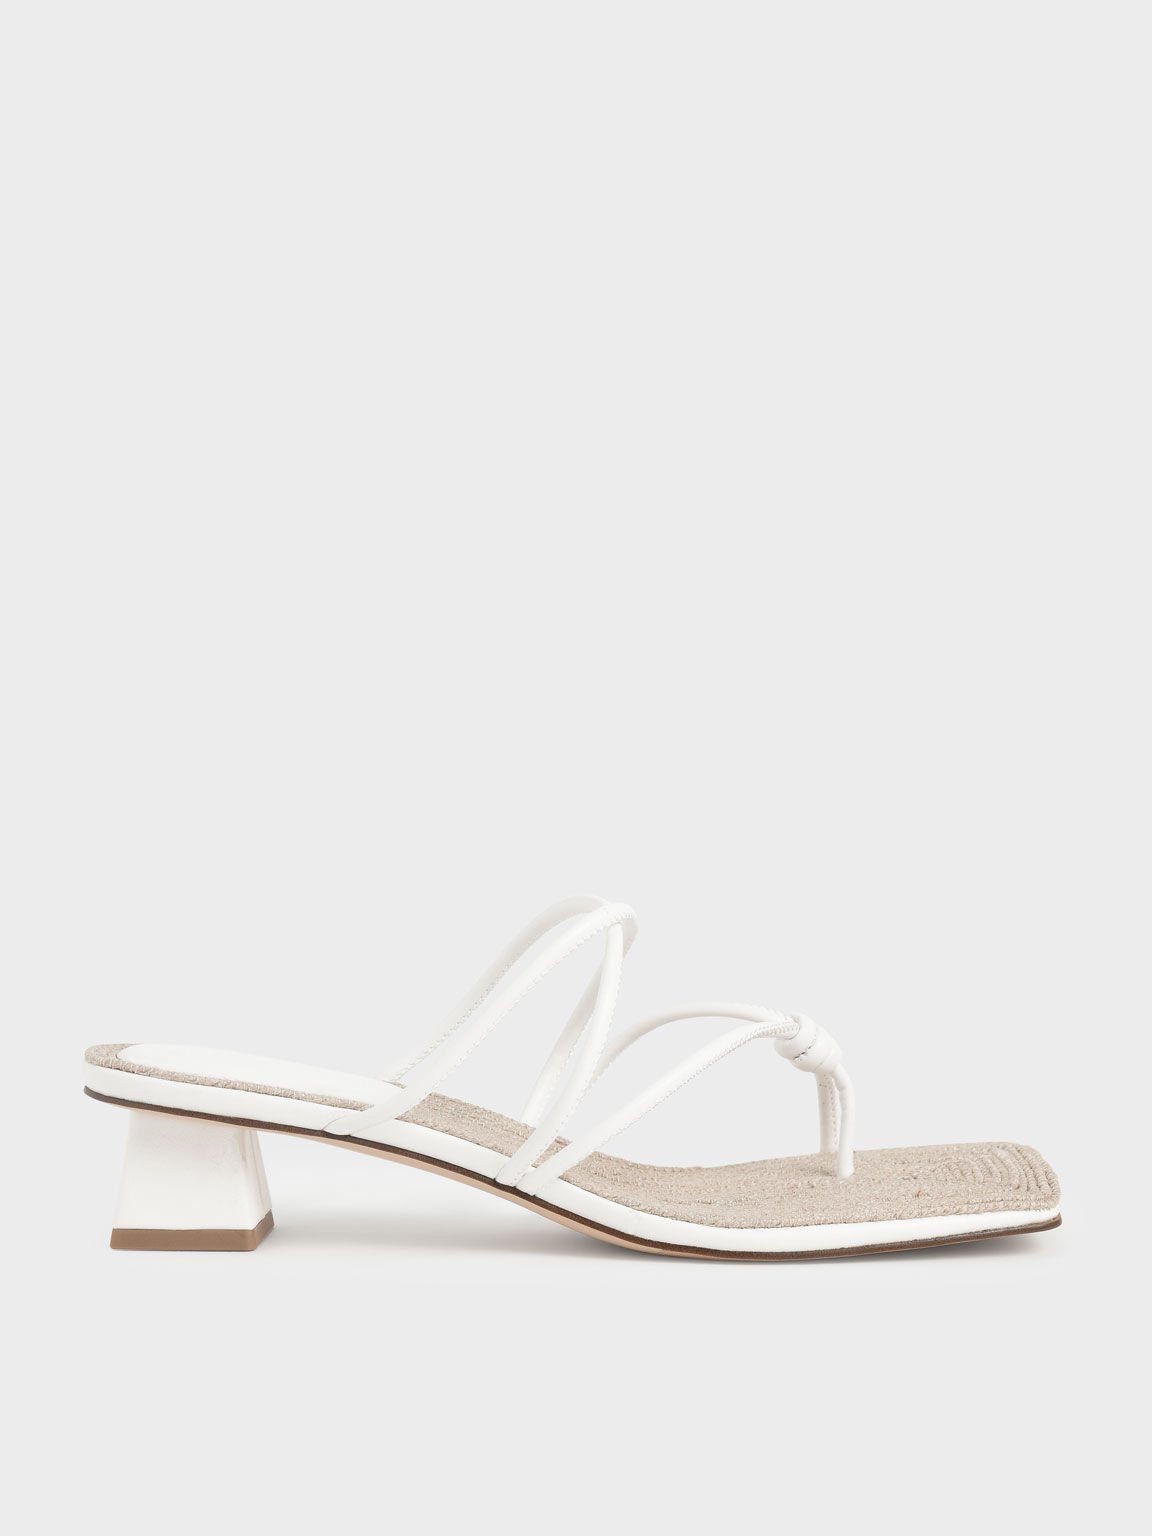 Toe Loop Strappy Heeled Sandals, White, hi-res